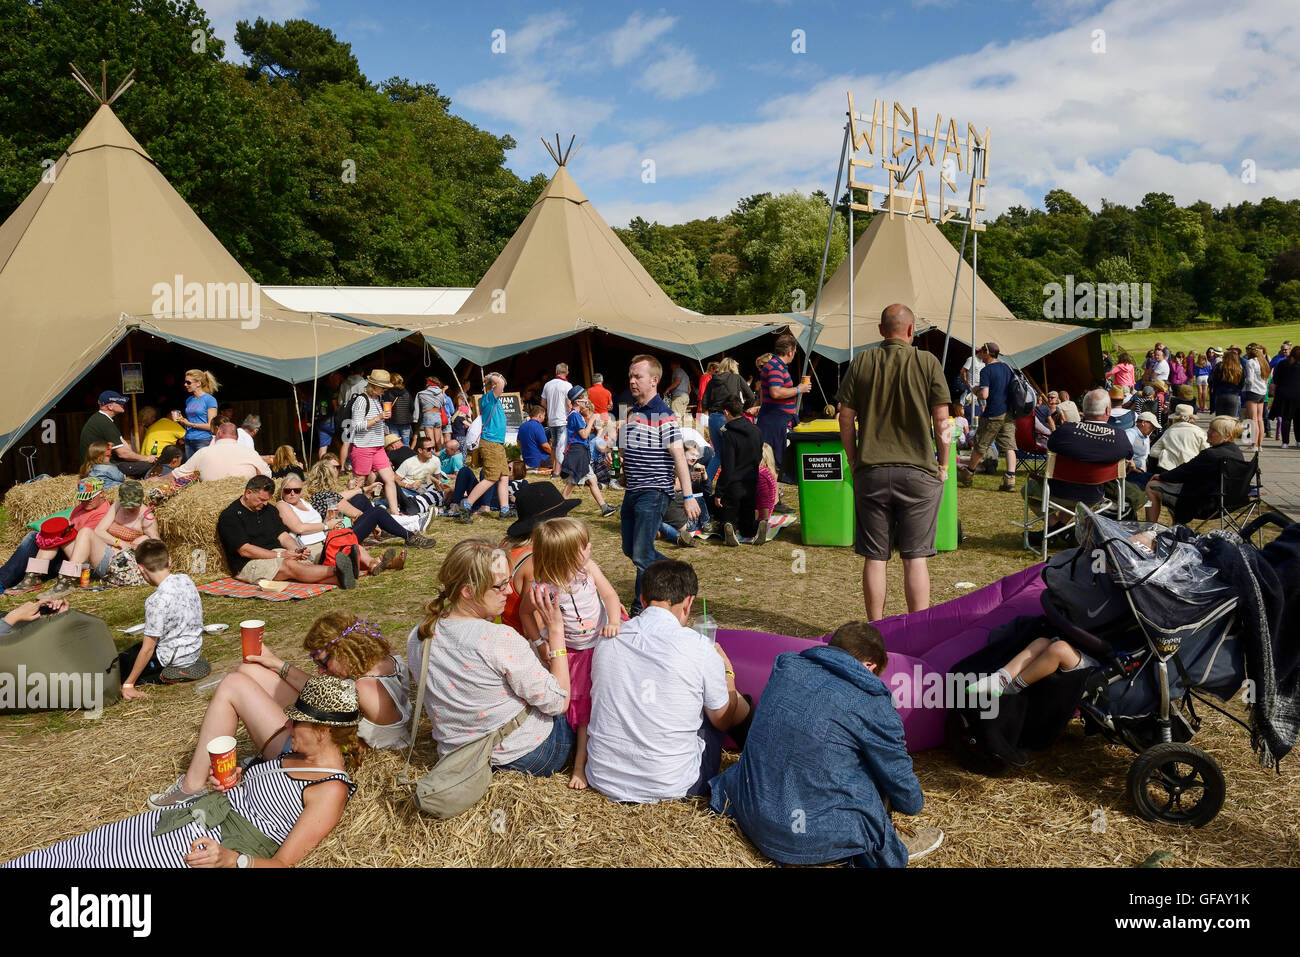 Carfest North, Bolesworth, Cheshire, UK. 30th July 2016. People relaxing at the Wigwam stage. The event is the brainchild of Chris Evans and features 3 days of cars, music and entertainment with profits being donated to the charity Children in Need. Andrew Paterson/Alamy Live News Stock Photo